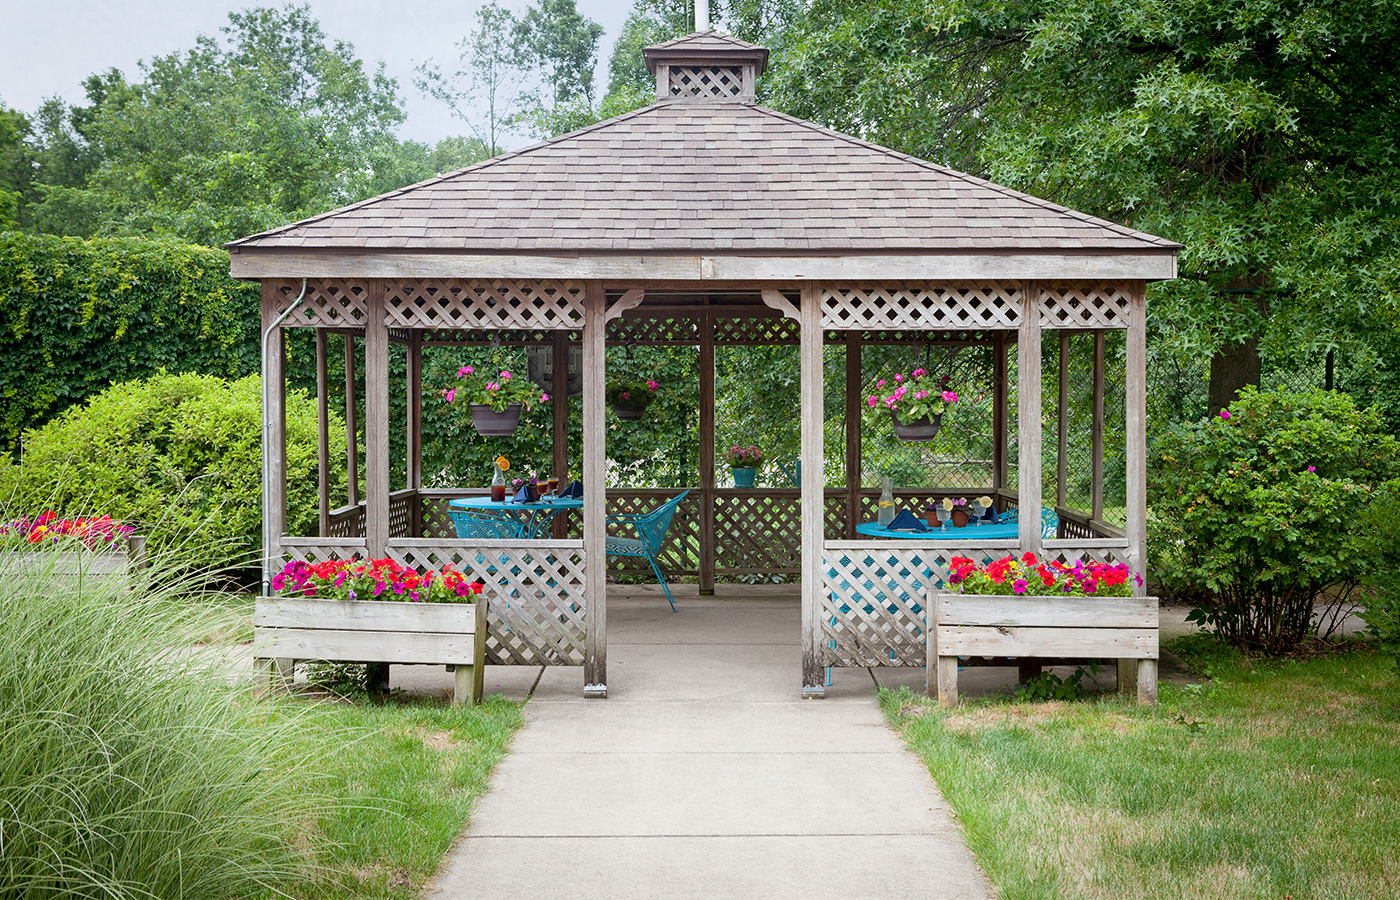 The gazebo at The Fountains at Bronson Place.